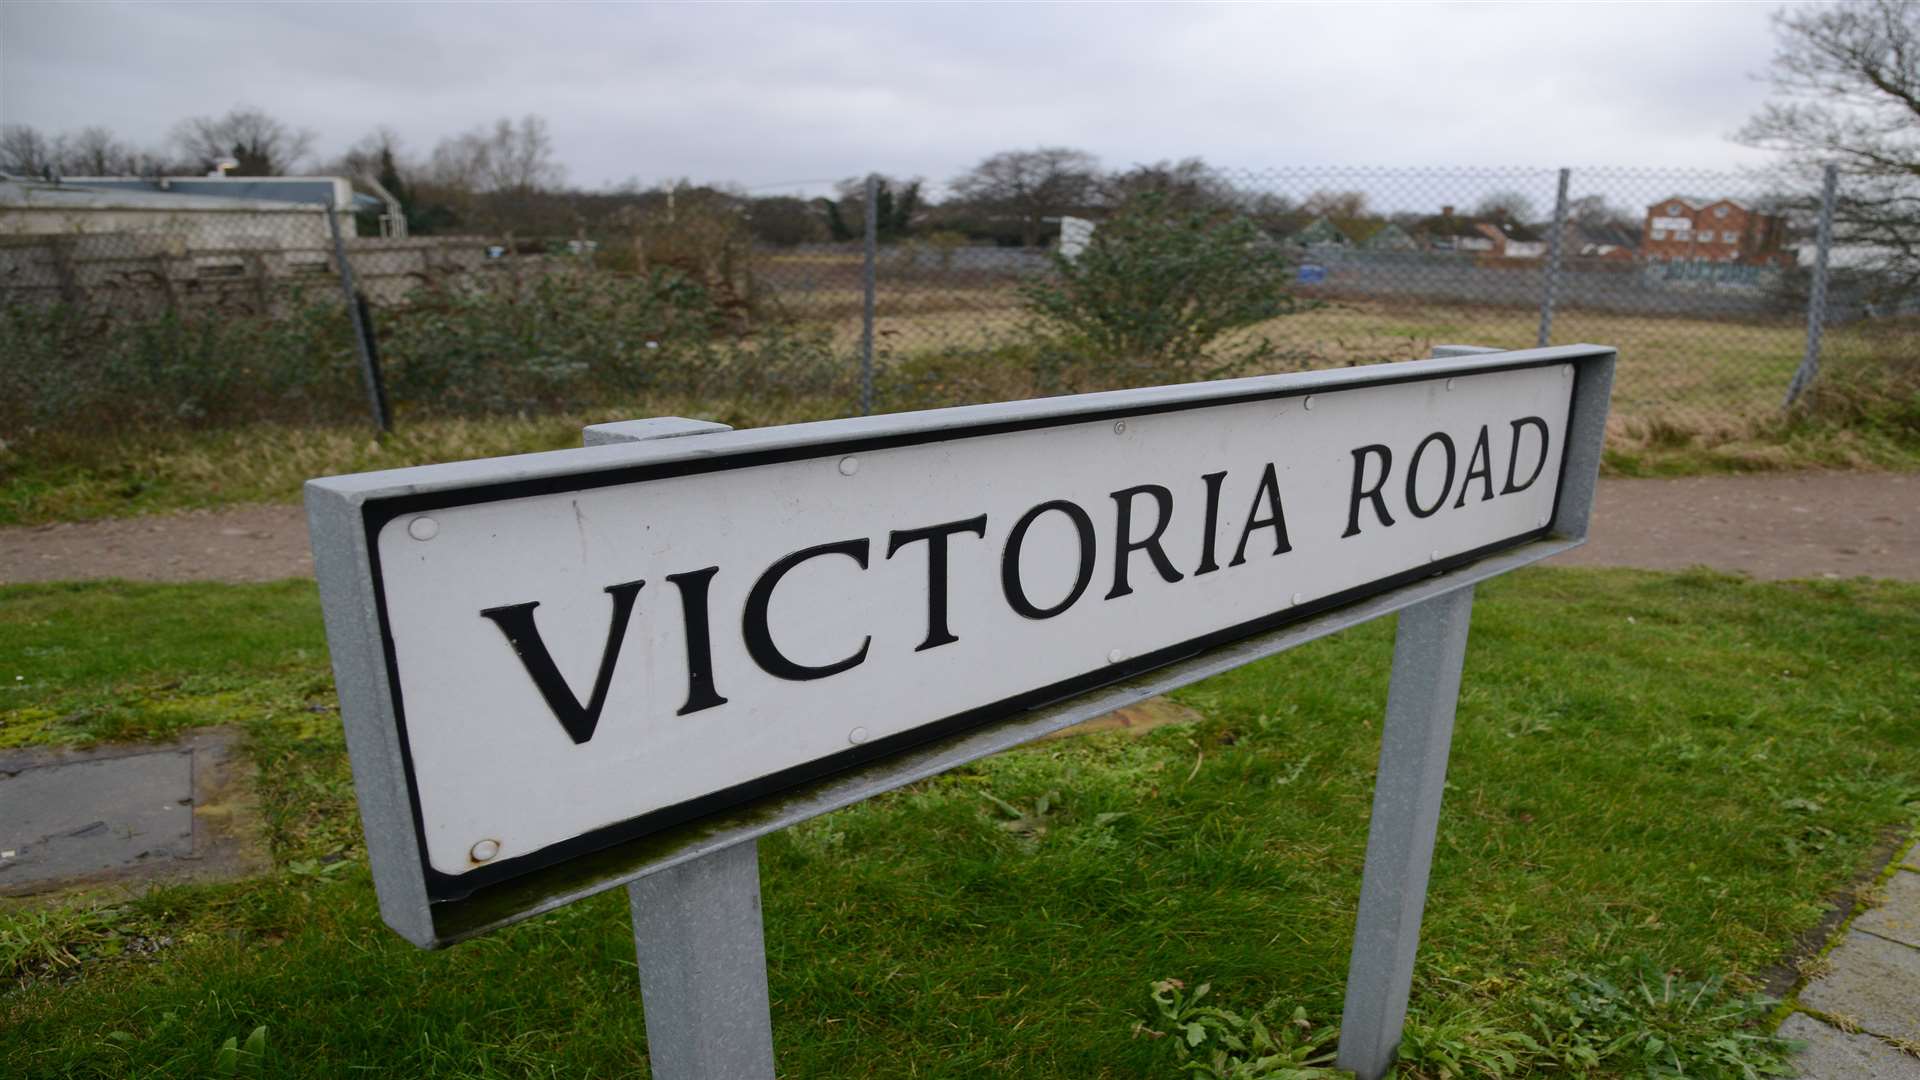 Victoria Road - at the centre of re-development plans for Ashford